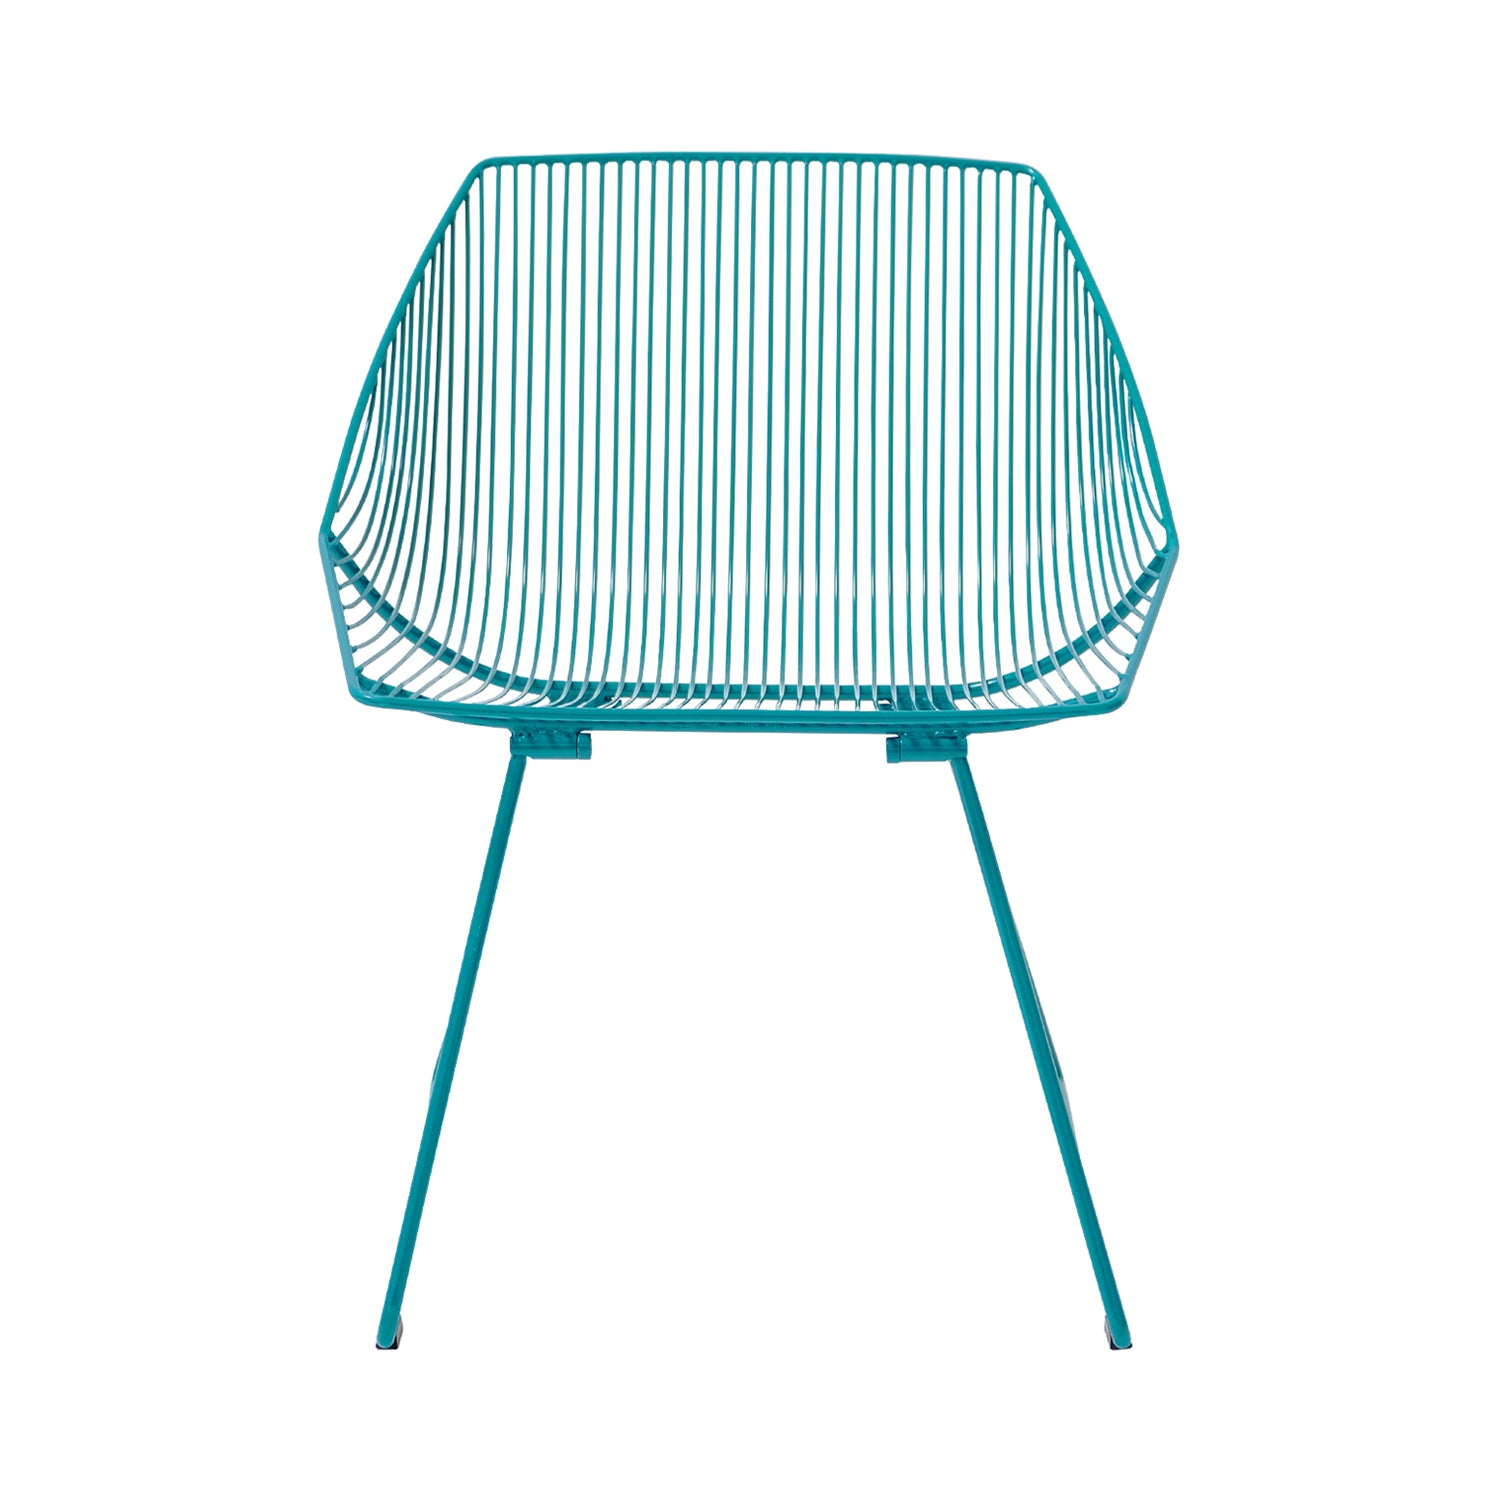 Bunny Lounge Chair: Color + Peacock Blue